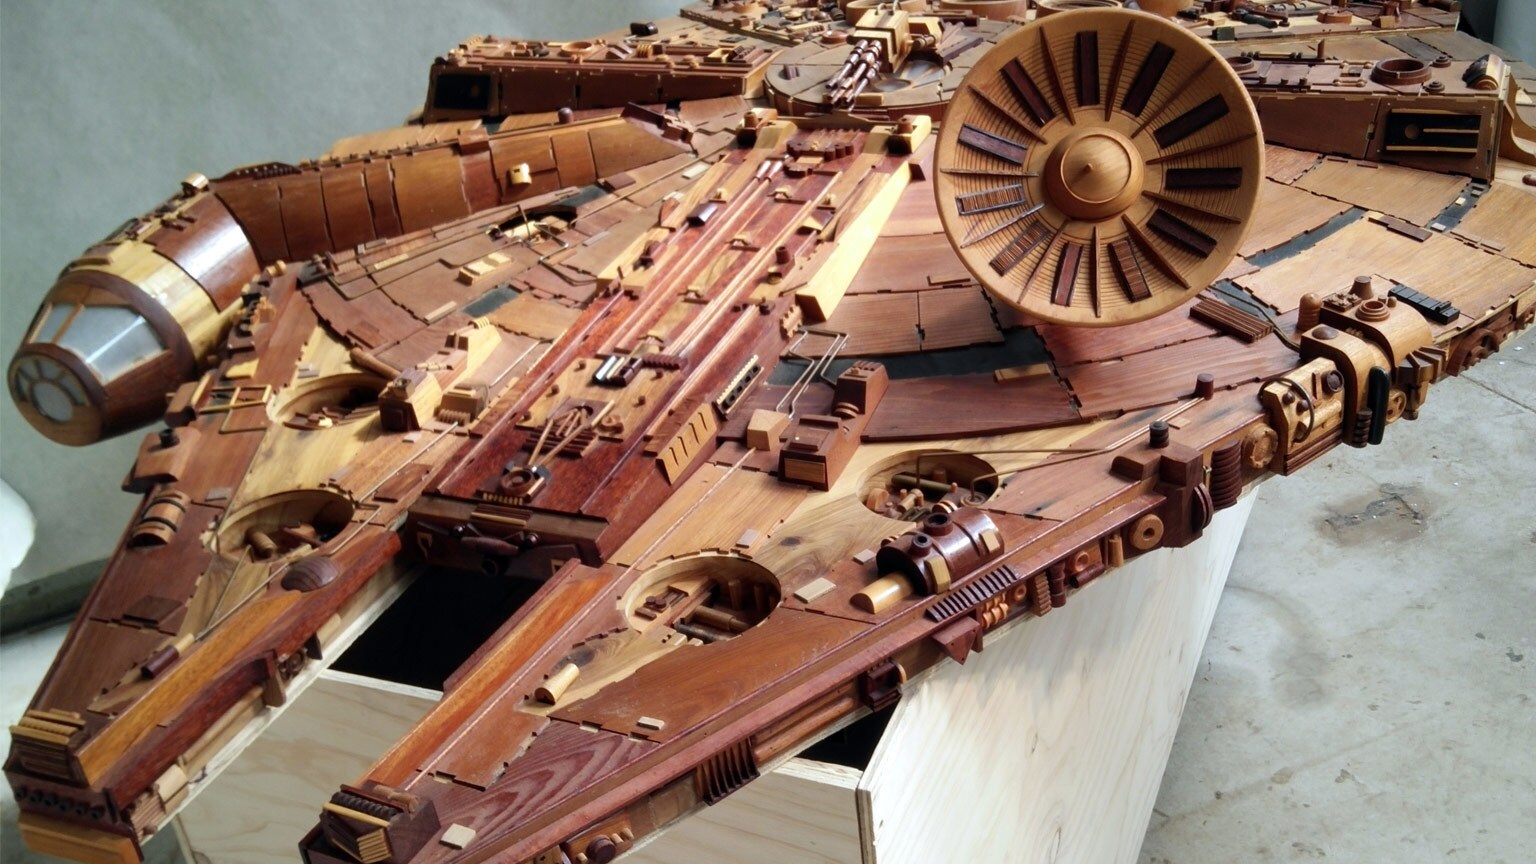 This LEGO Millennium Falcon Model Must Be Seen to Be Believed